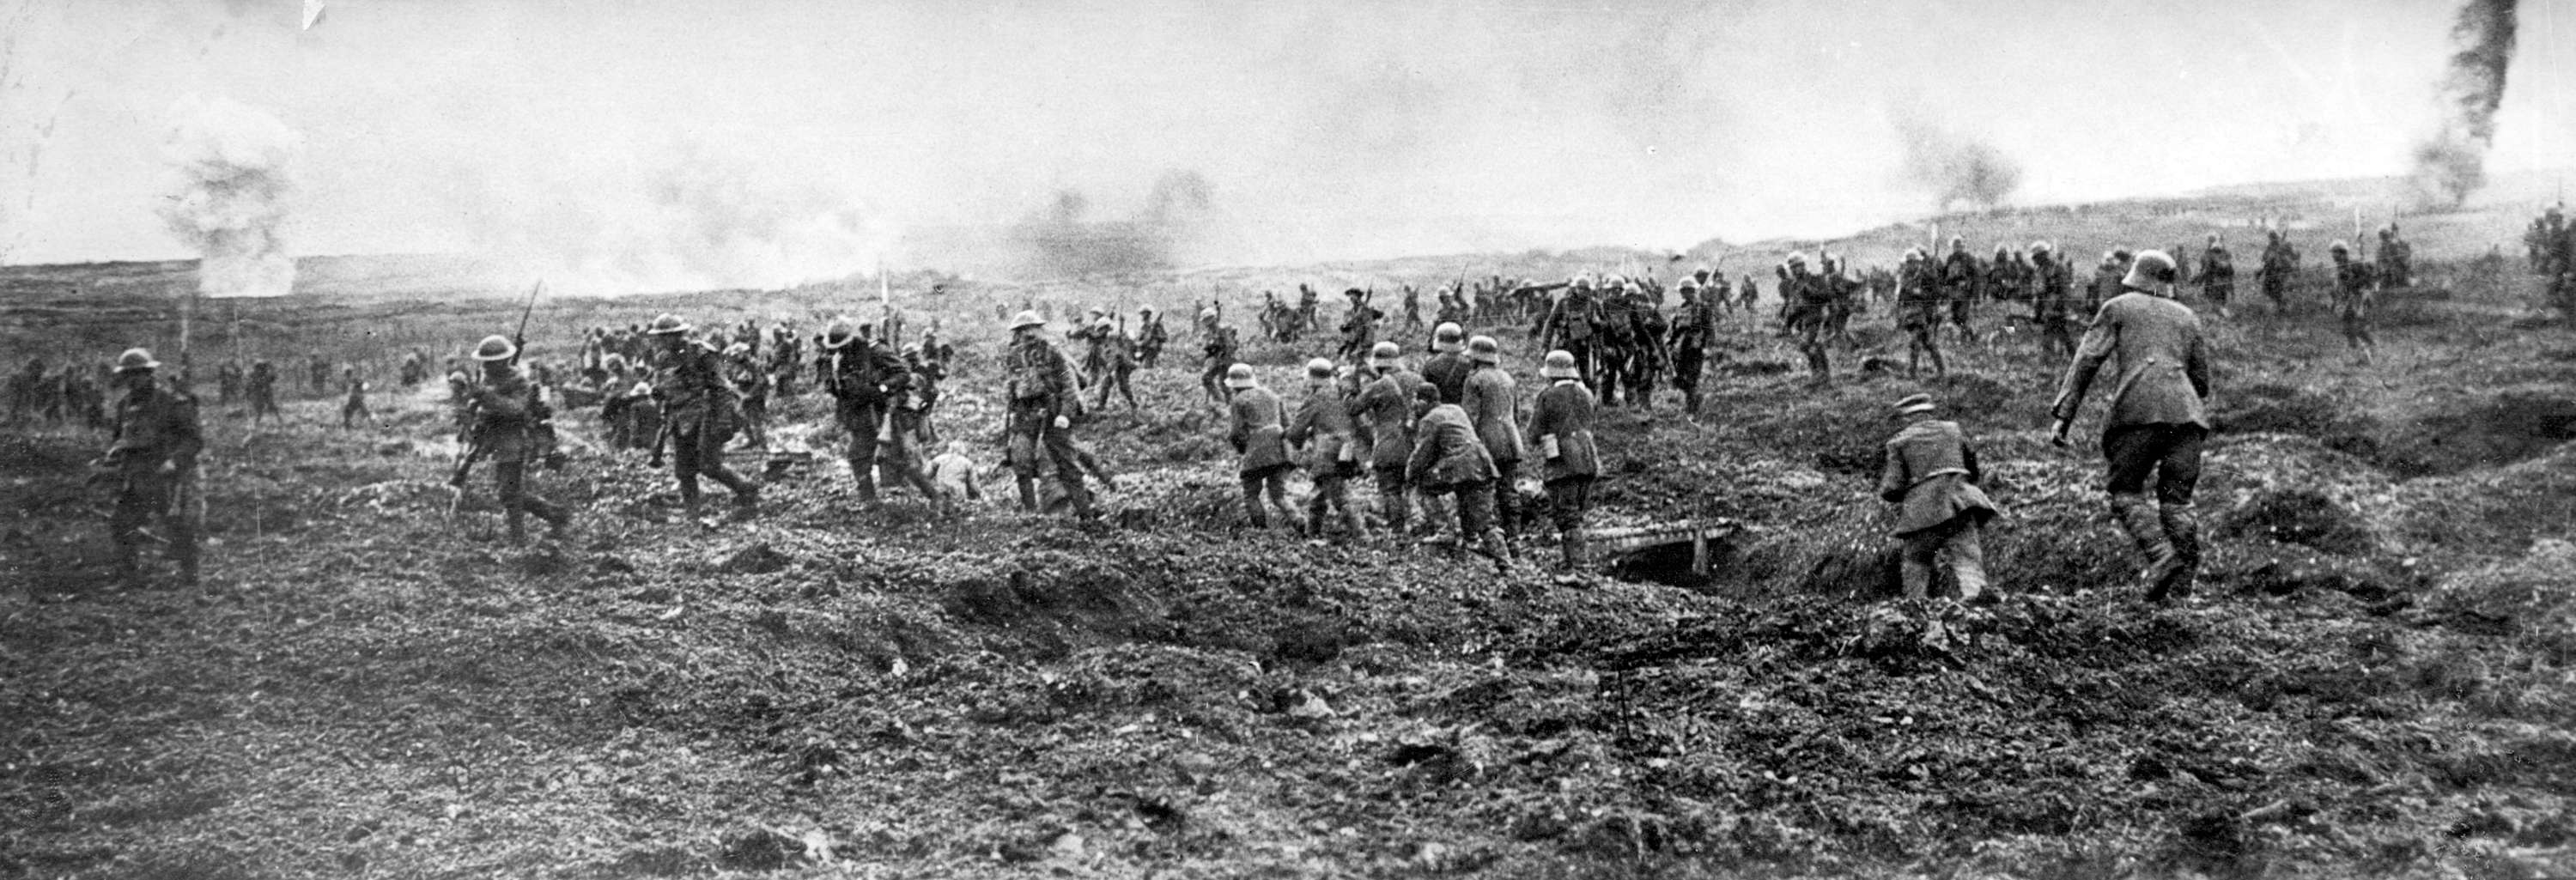 Taking of Vimy another section of the field.jpg